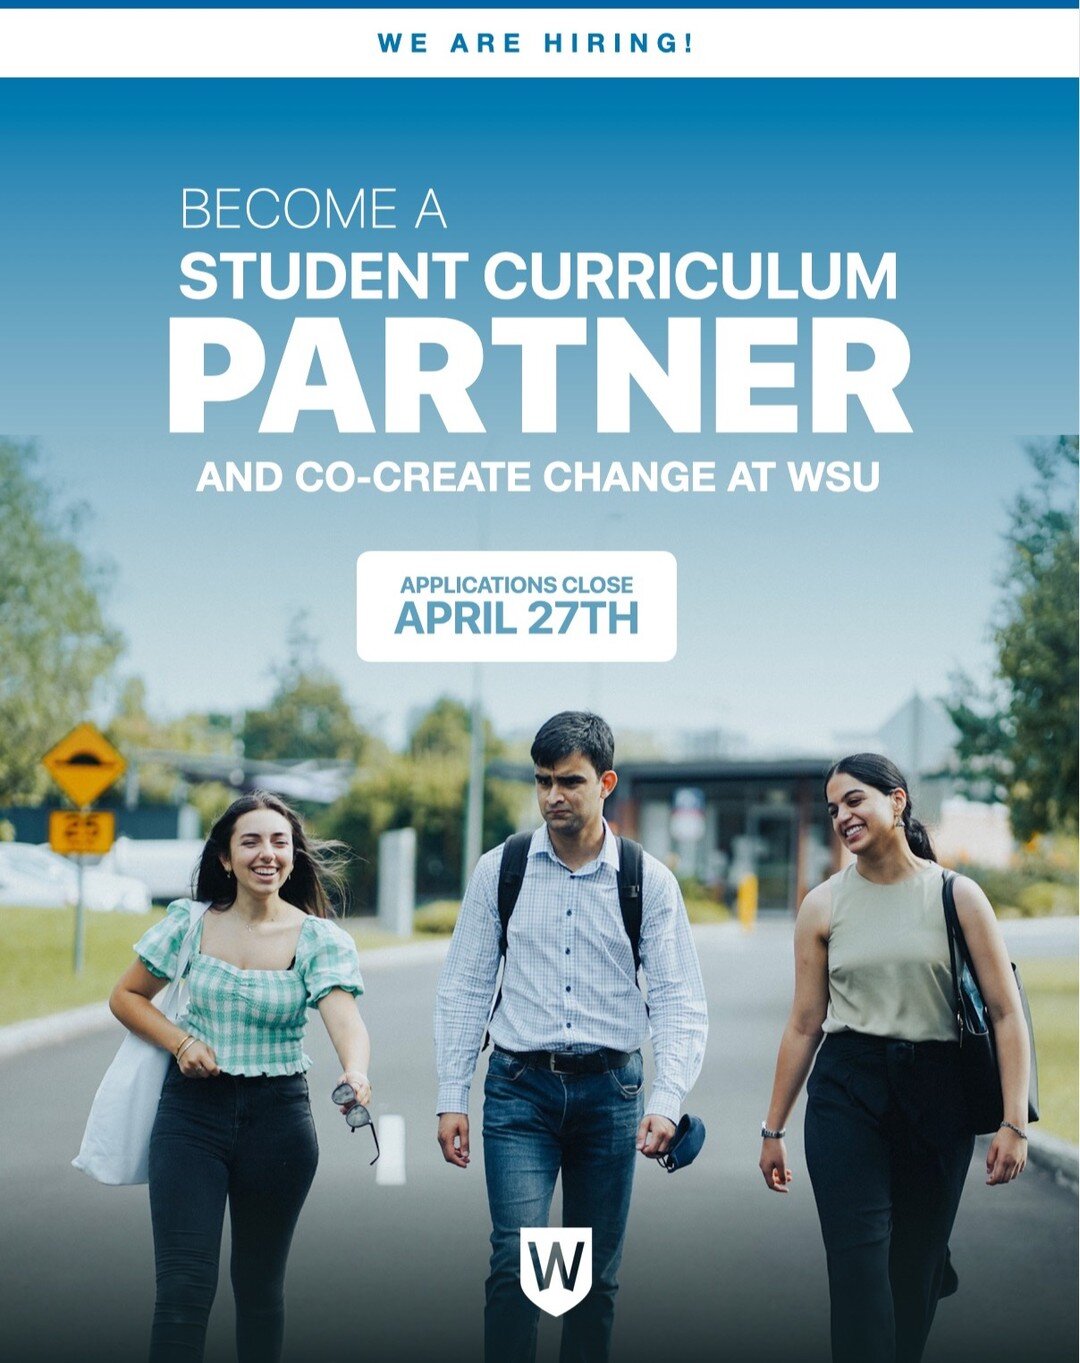 Join our team of #westernsap working on curriculum co-creation in the 21C project!! Apply through the Jobs on Campus portal here https://bit.ly/3xEmxtP

@westernsydneyu

 #westernsydney #uni #studentpartners #studentcurriculum #saps #2022 #westernsyd